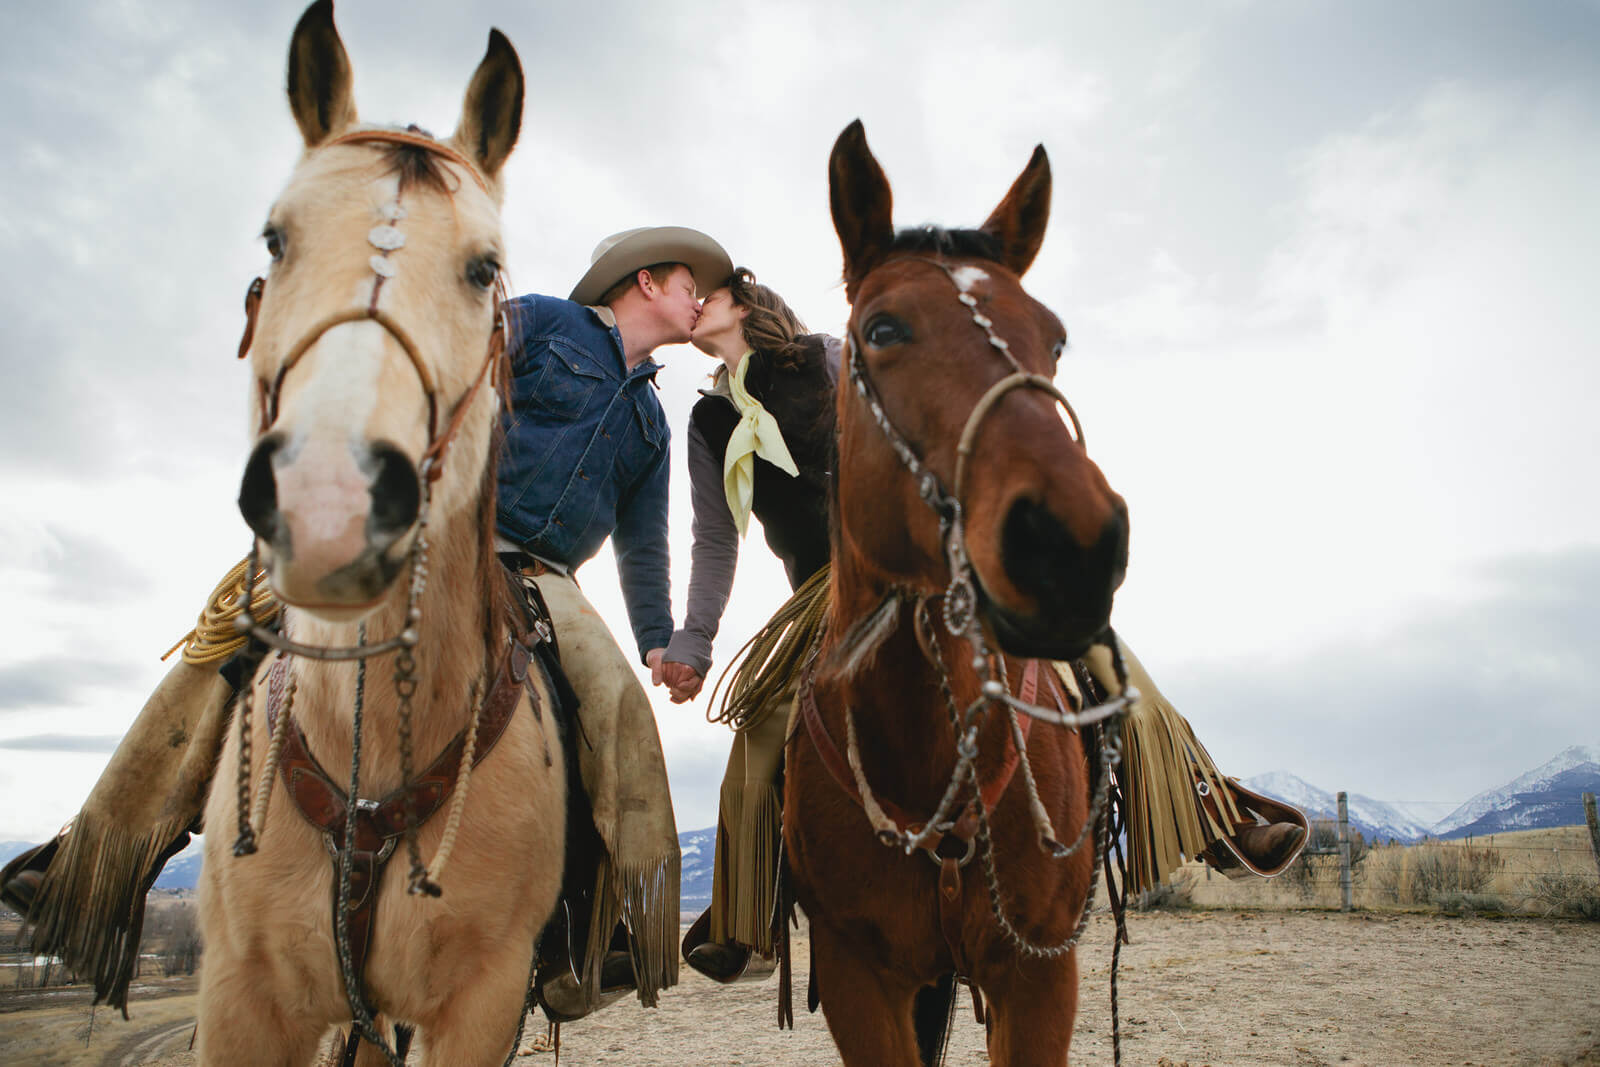 An engaged couple kiss while sitting on their horses in Montana